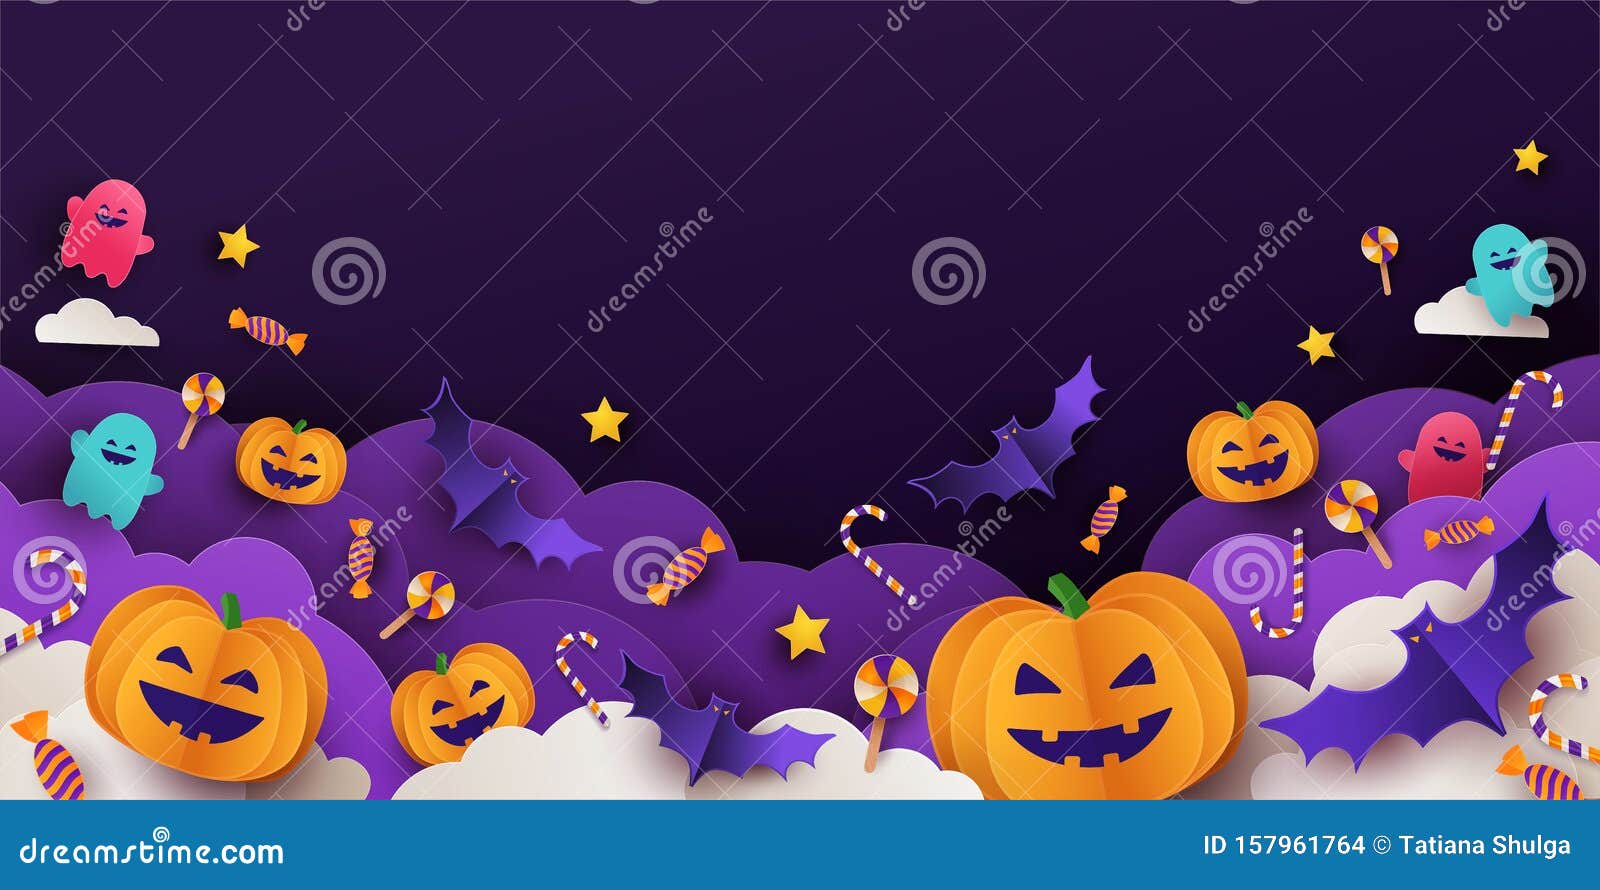 halloween background for party invitation, greeting card, web banner or sales with candies, cutest pumpkins, bats and ghosts